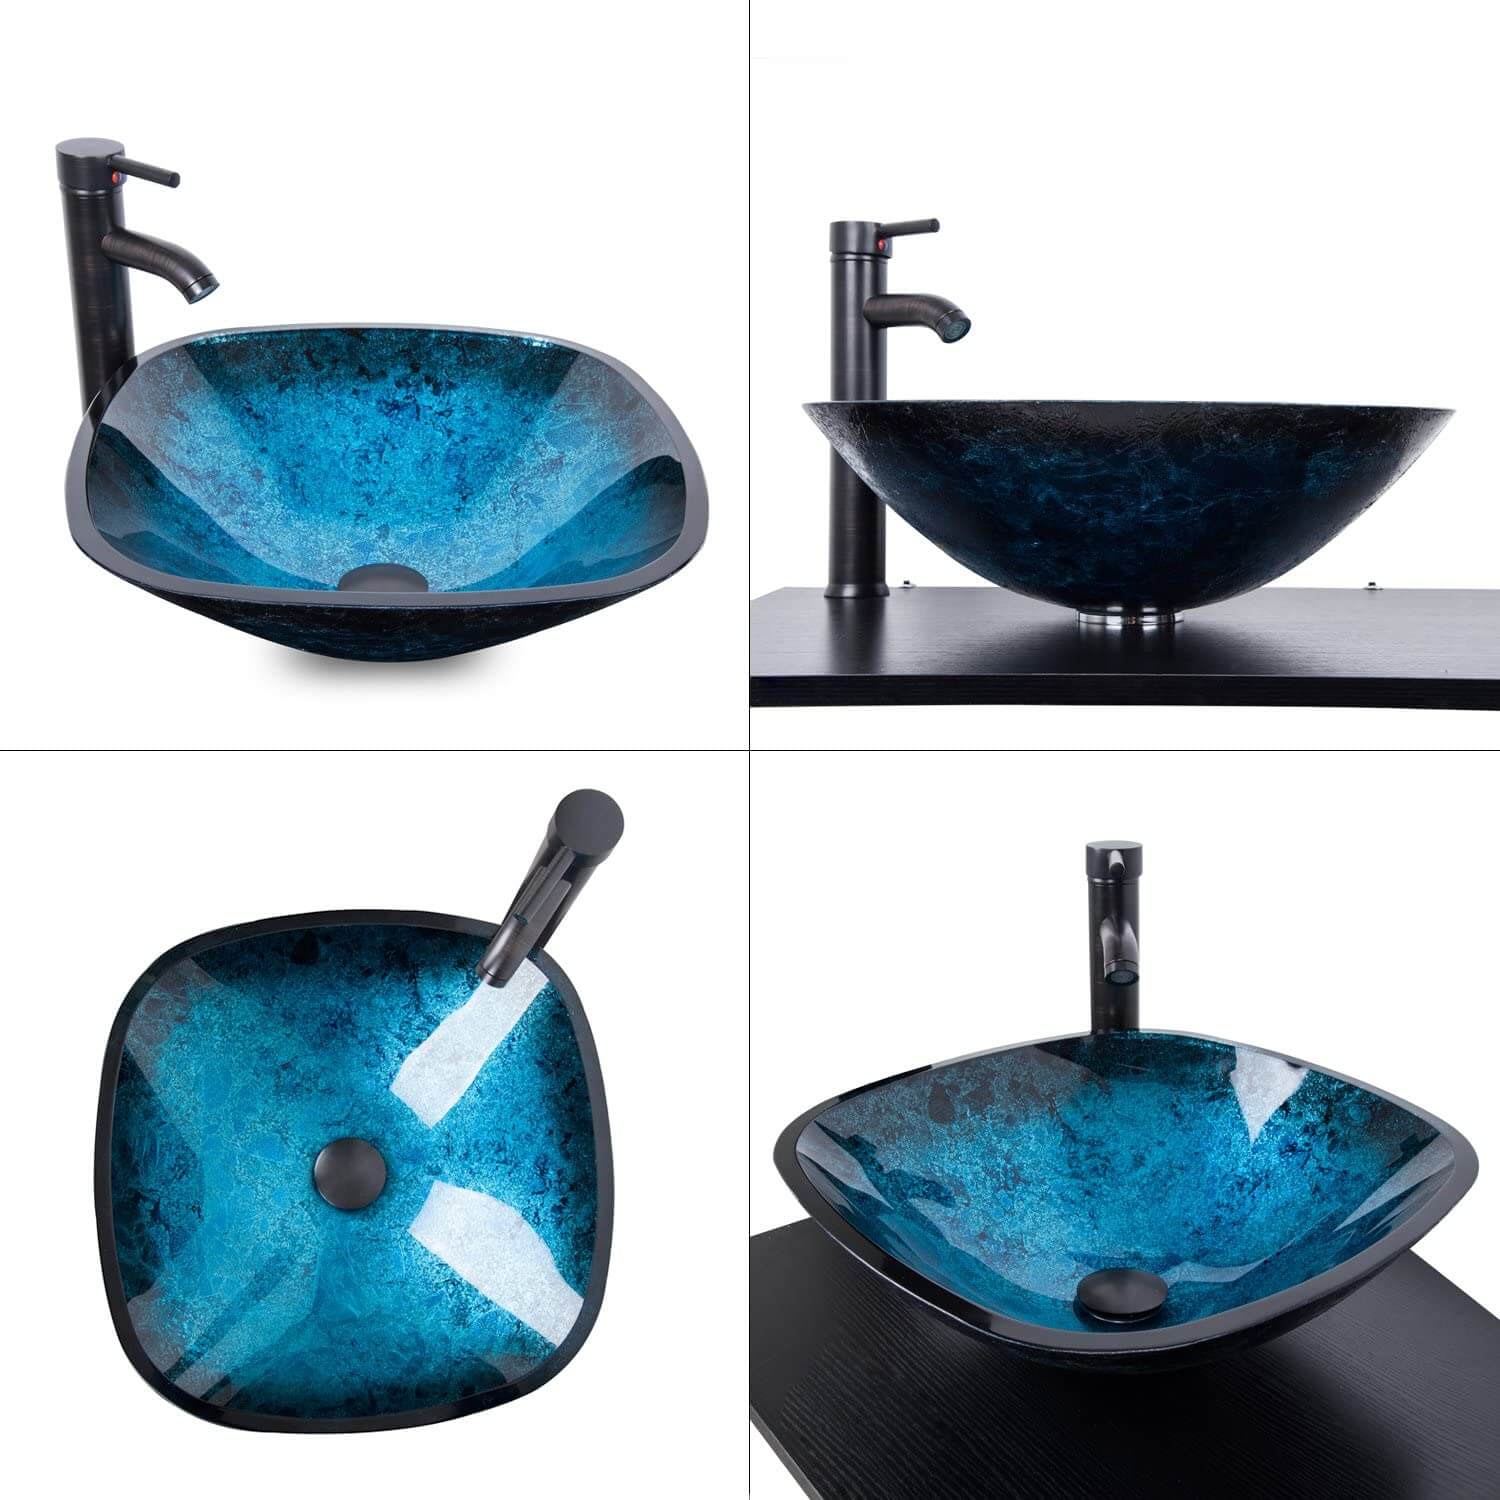 4 angles of Elecwish ocean blue glass sink